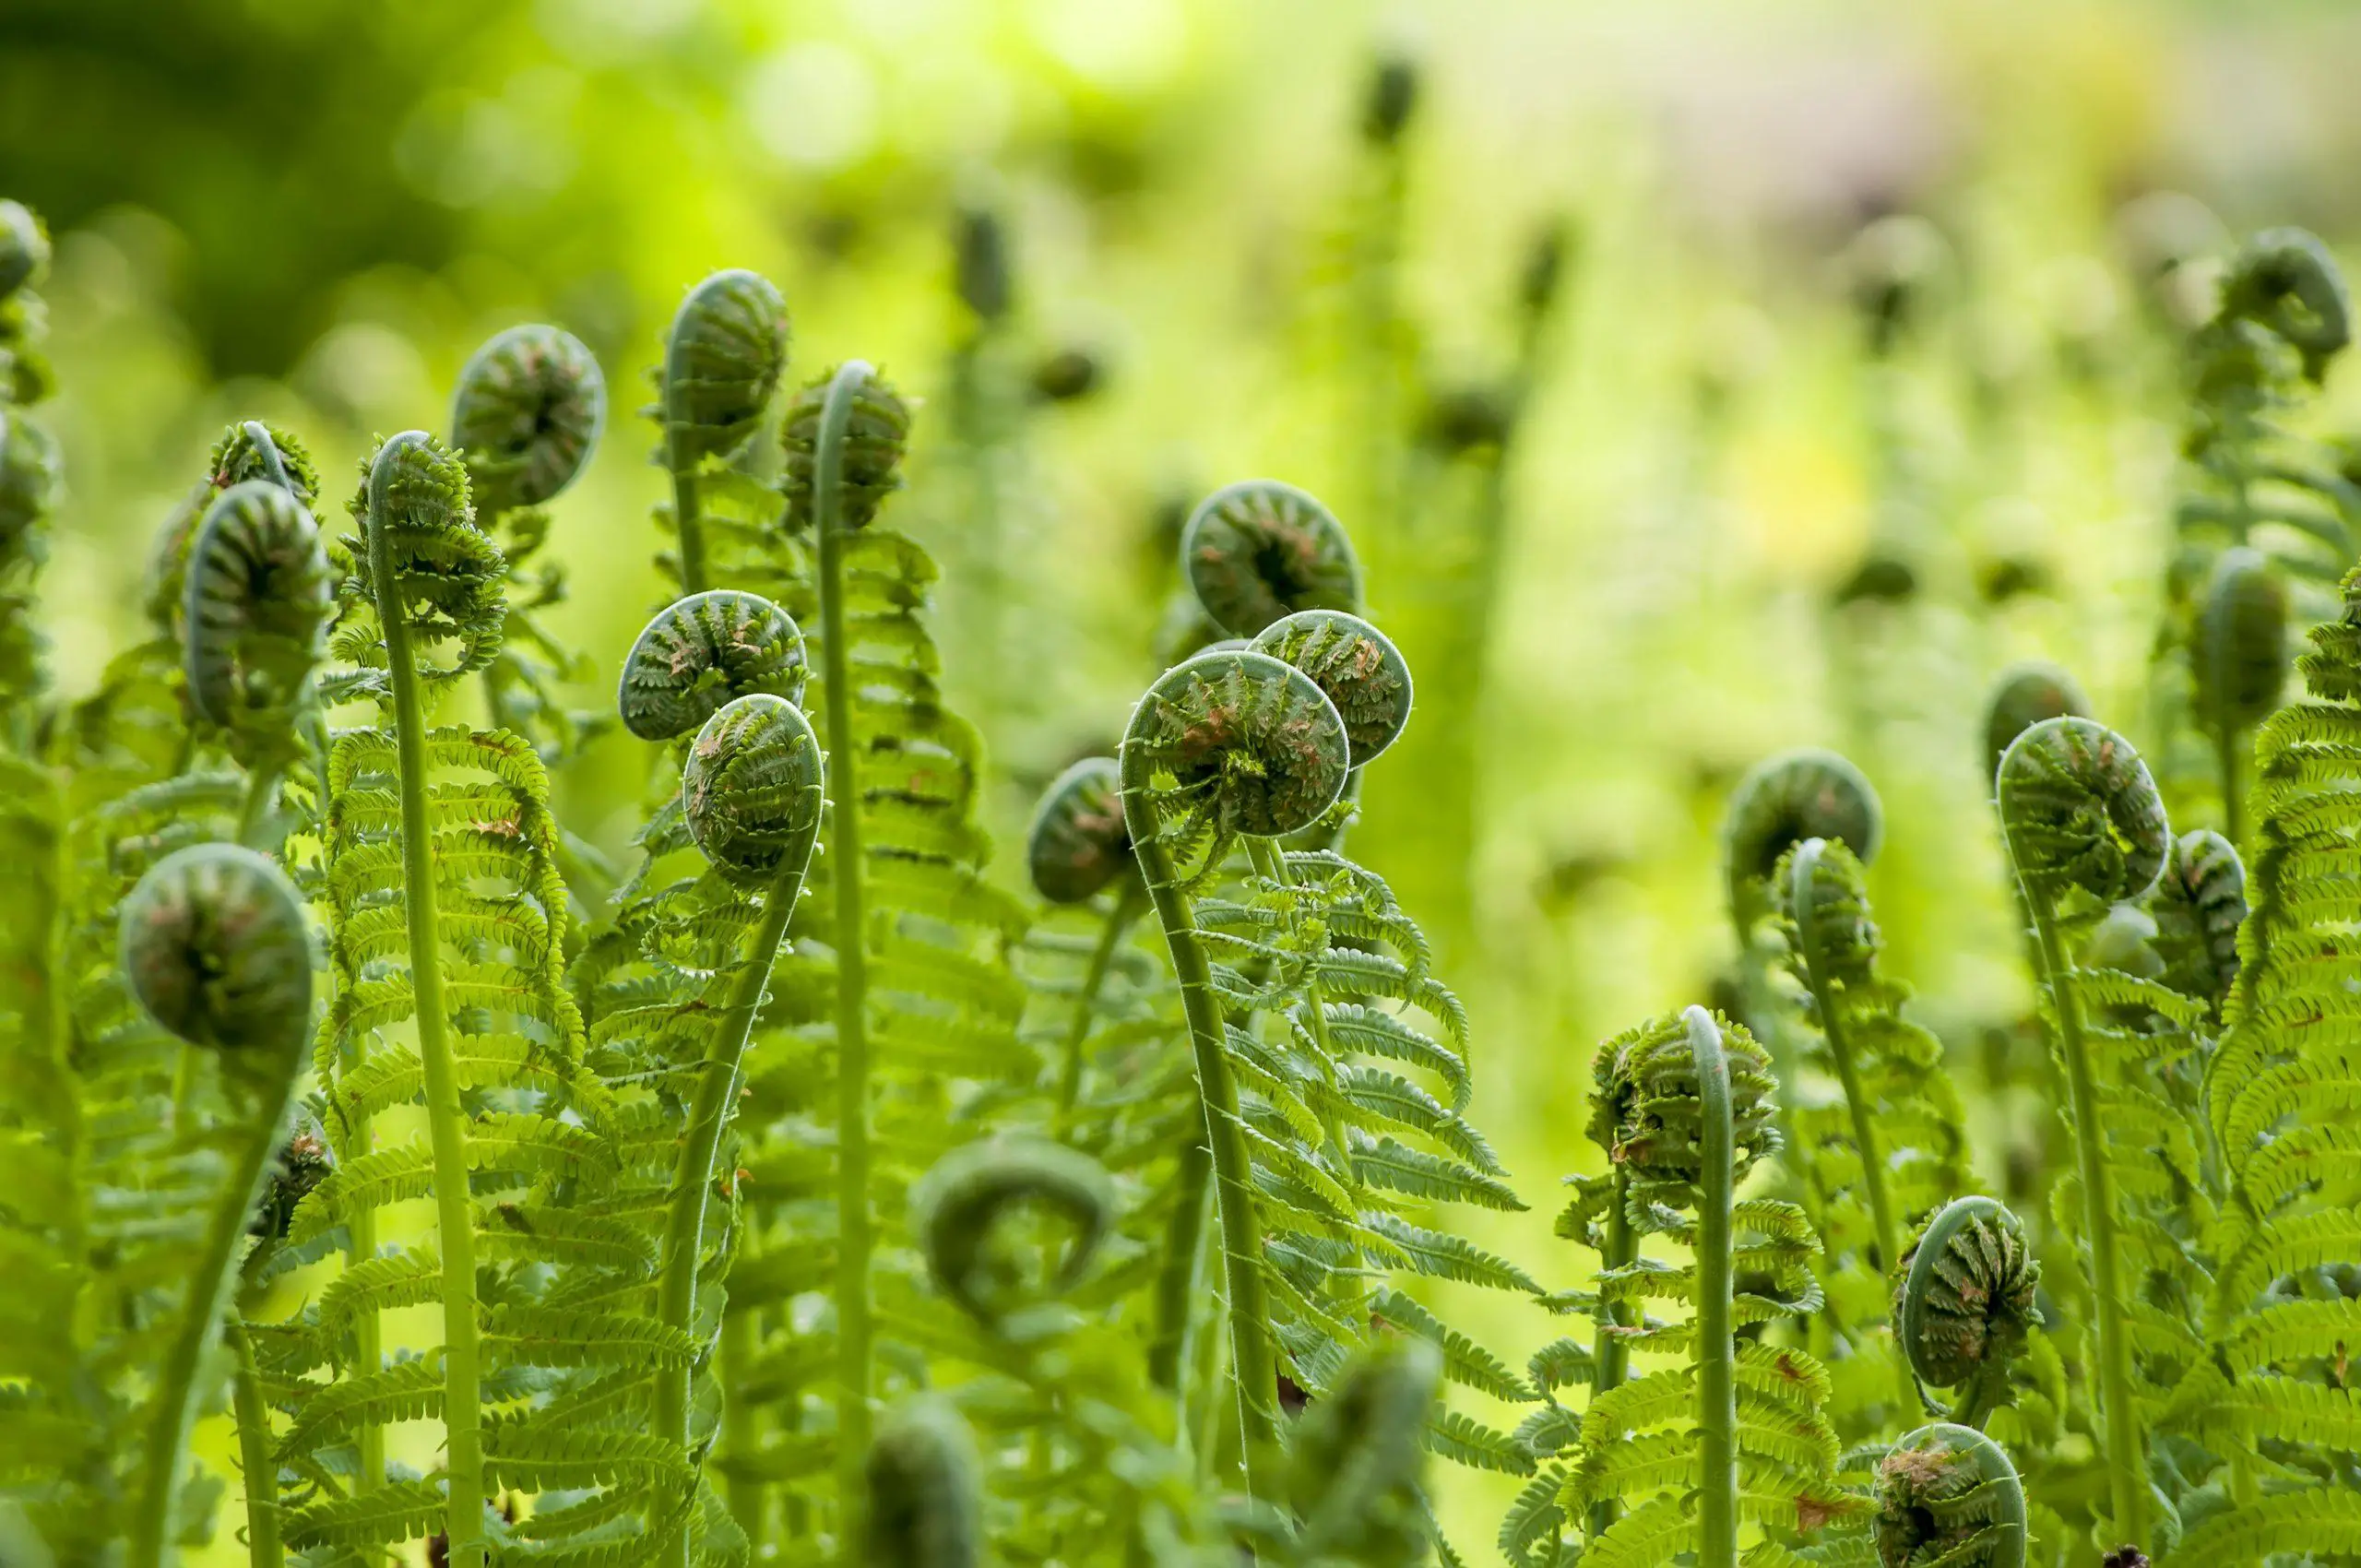 Ferns growing opening within a garden